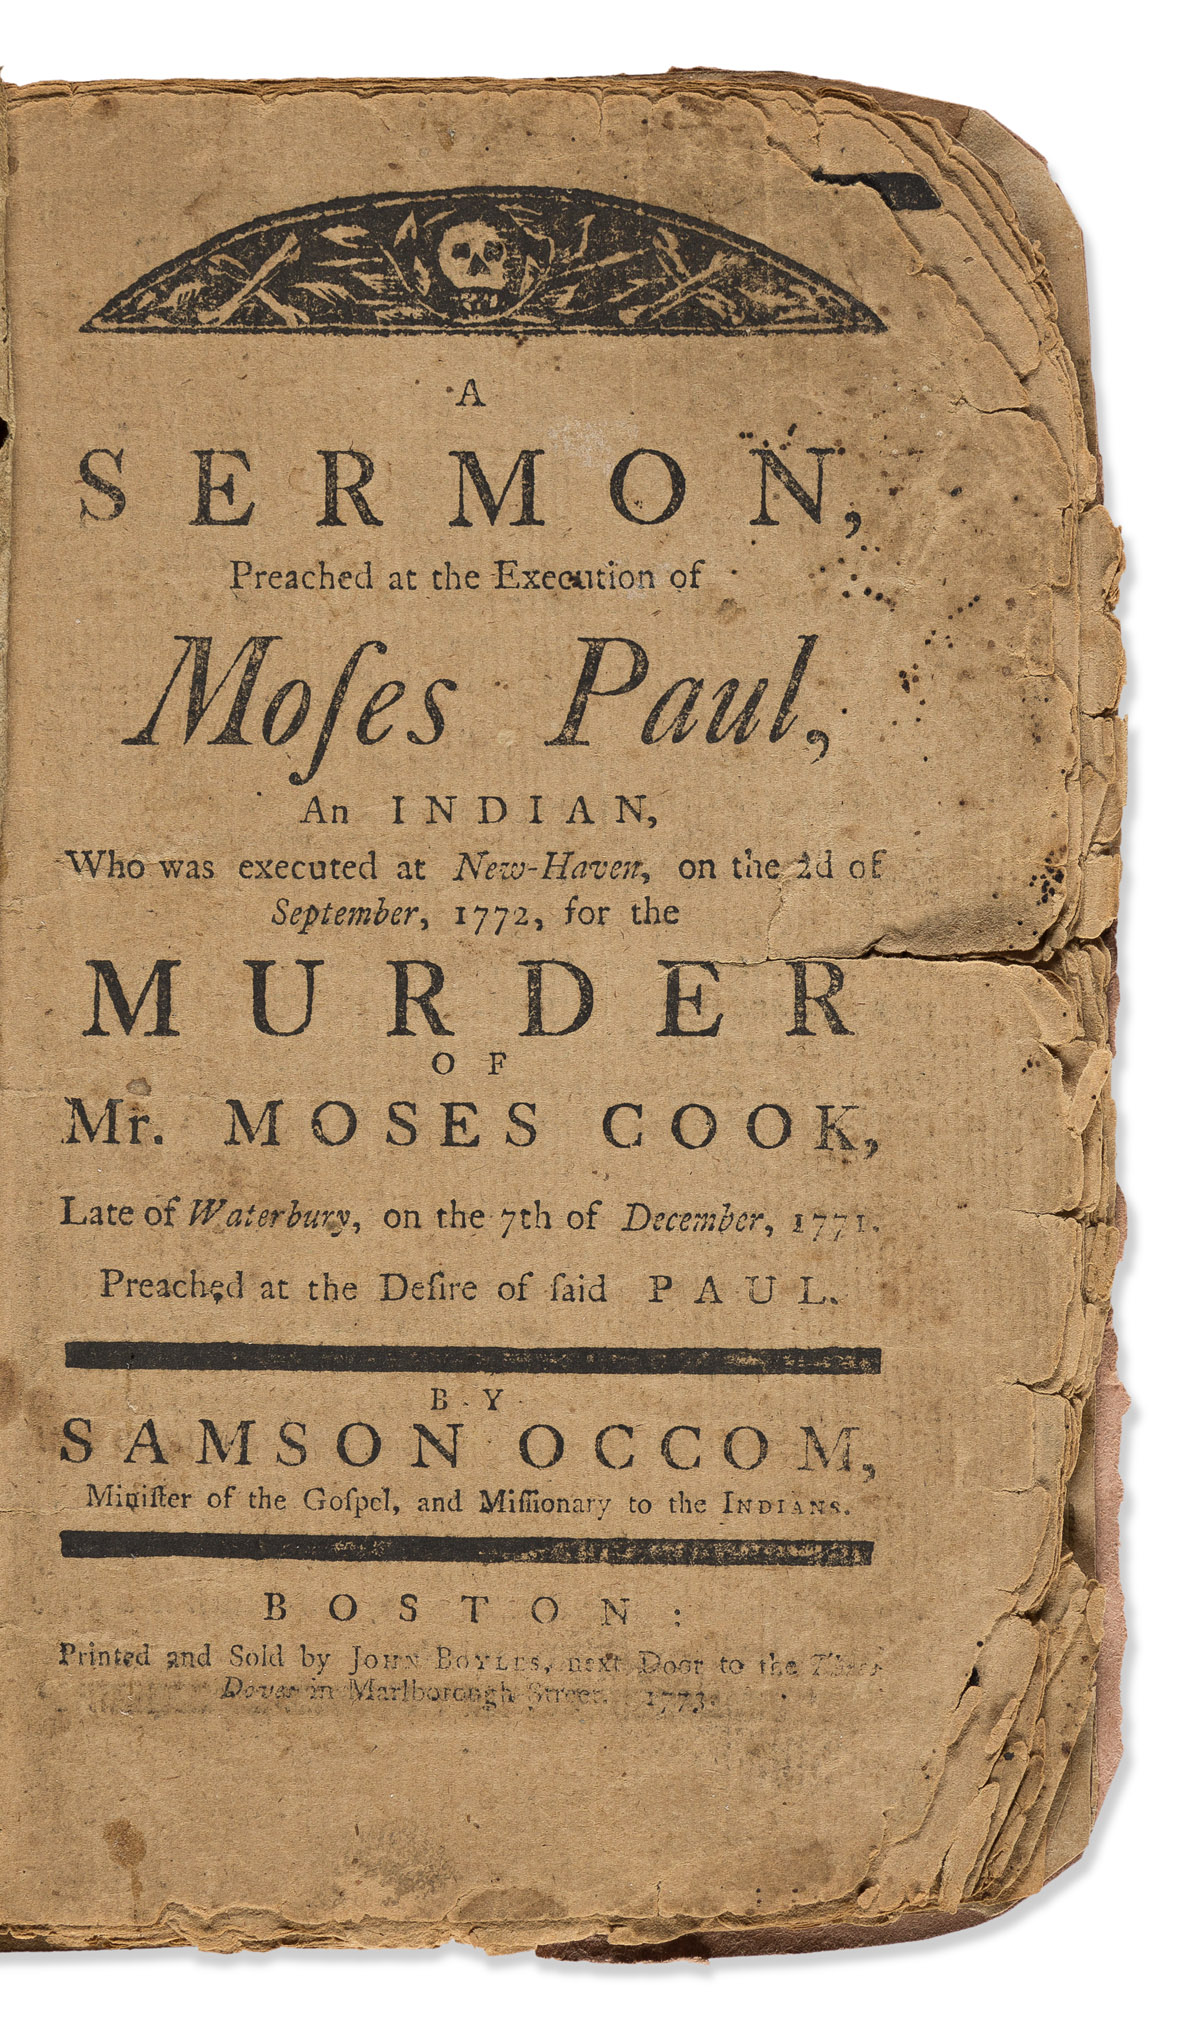 (AMERICAN INDIANS.) Samson Occom. A Sermon Preached at the Execution of Moses Paul, an Indian, who was Executed at New-Haven.